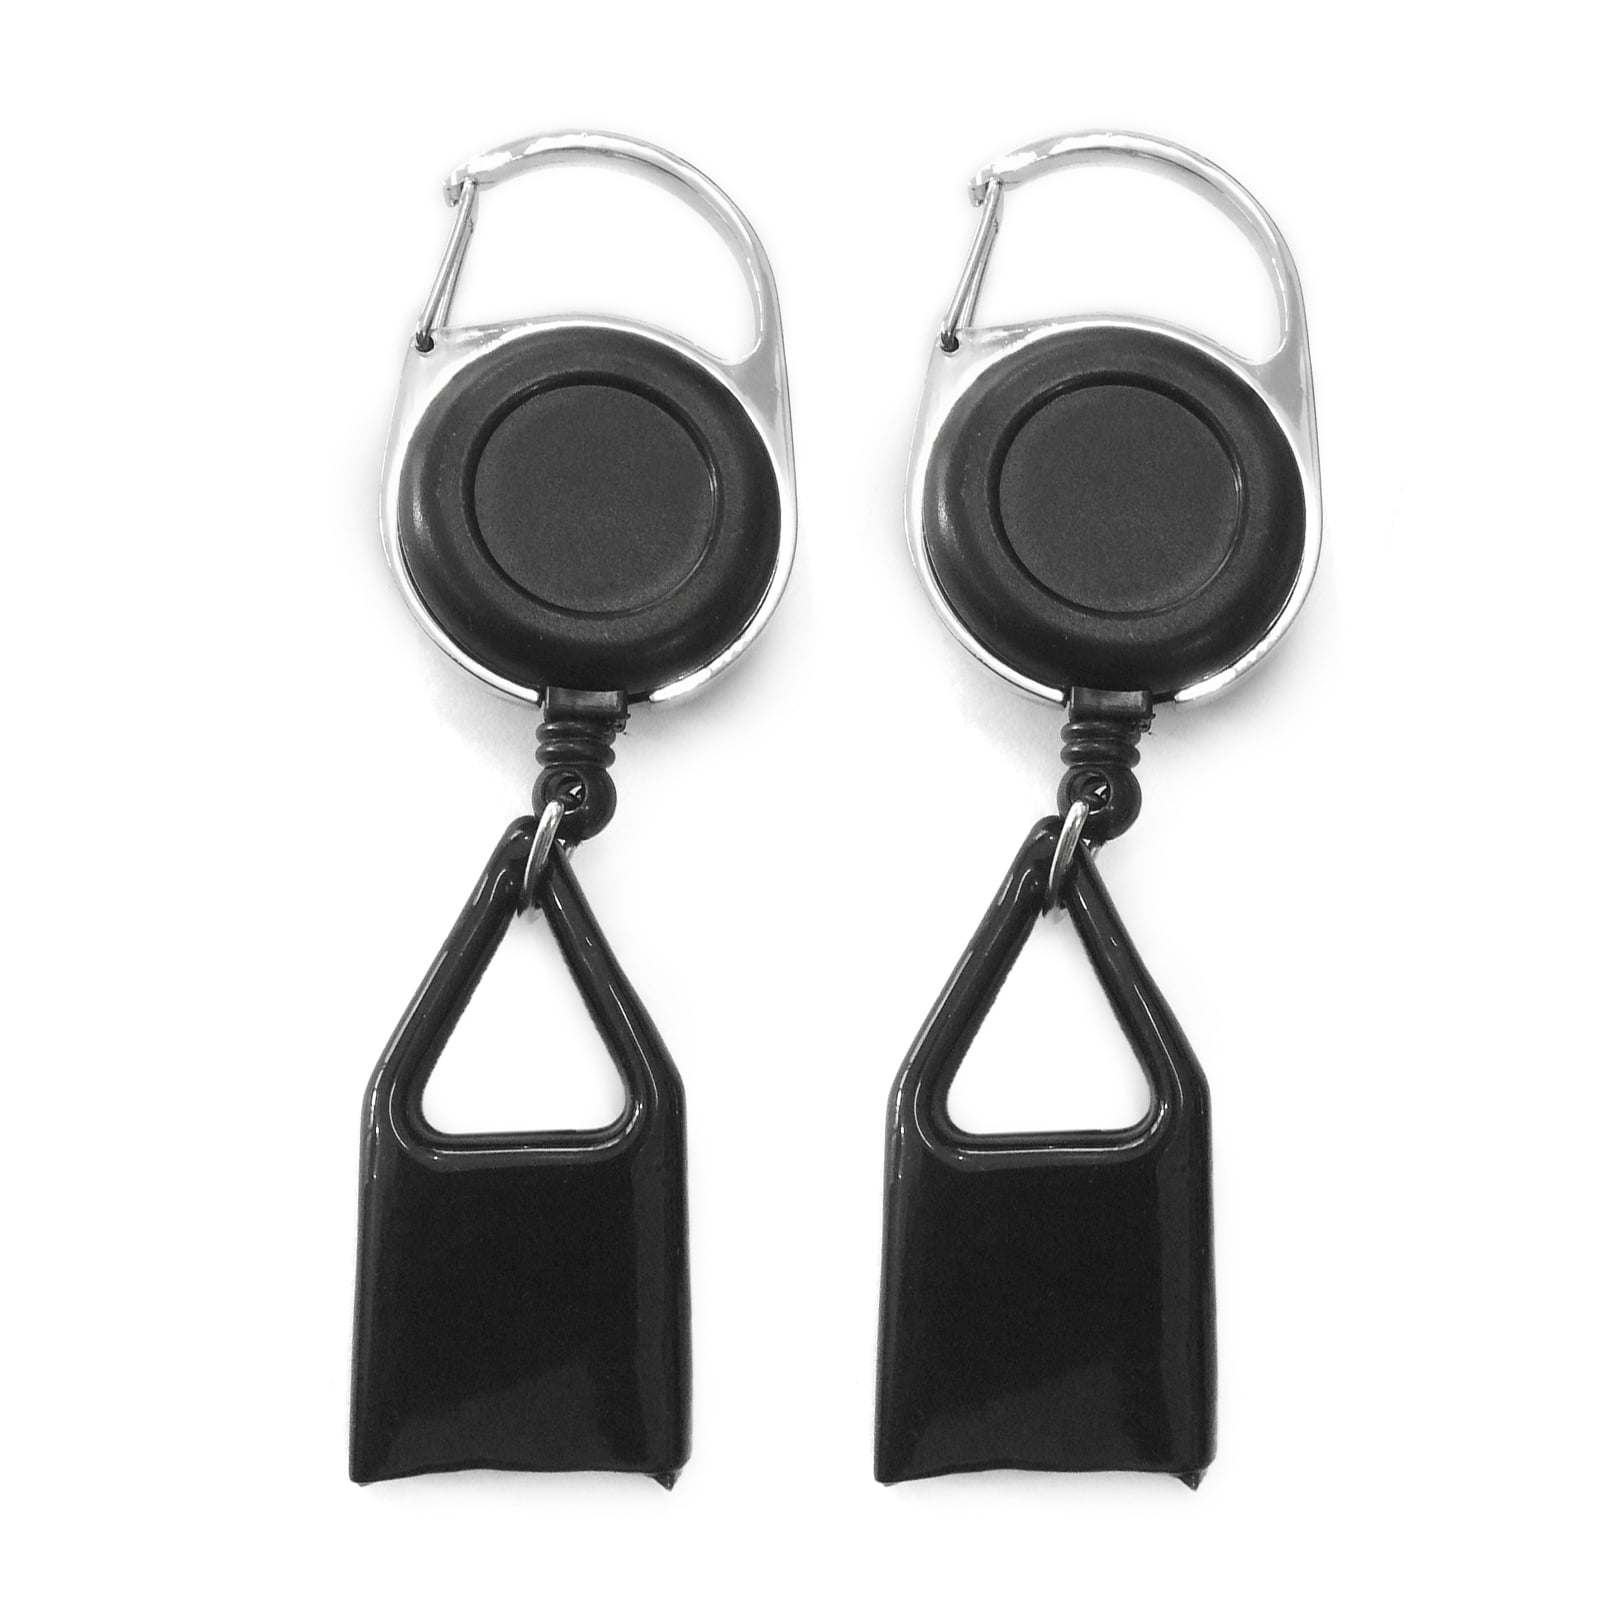 2 Pieces Retractable Keychain Holder with lighter Leash Portable